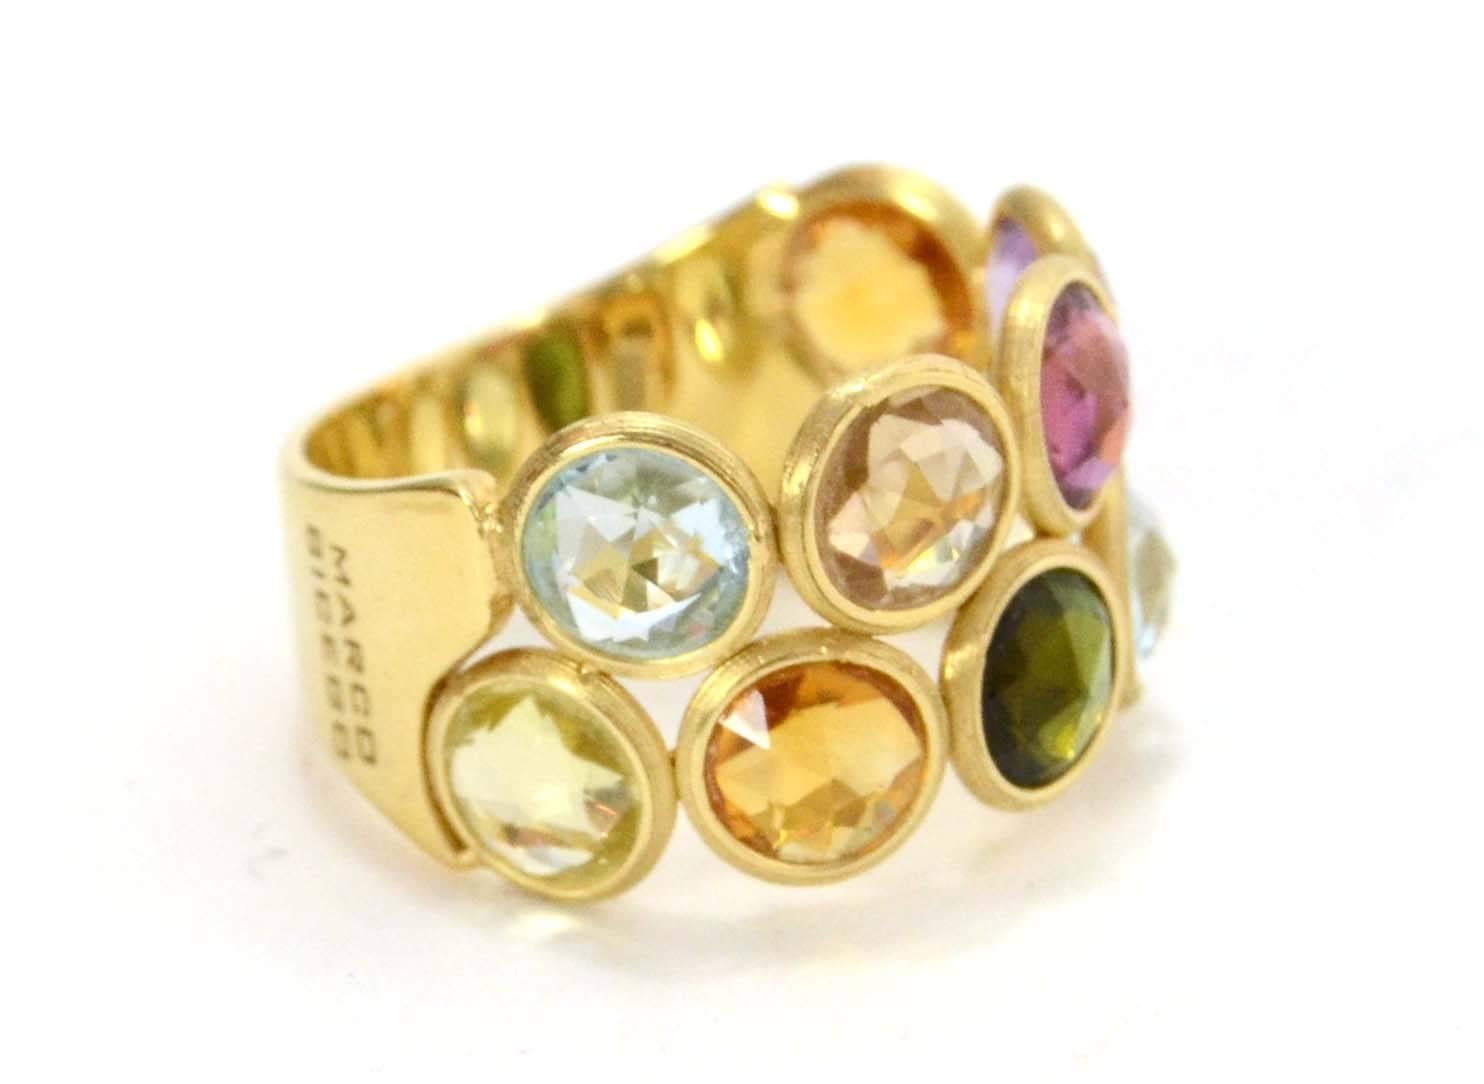 Marco Bicego 18k Gold & Multi-Colored Stone Jaipur Ring 
Features two rows of multi-colored gemstones

Made In: Italy
Color: Gold, green, blue, pink, purple, orange and peach
Materials: 18k gold and various stones
Closure: None
Stamp: 750